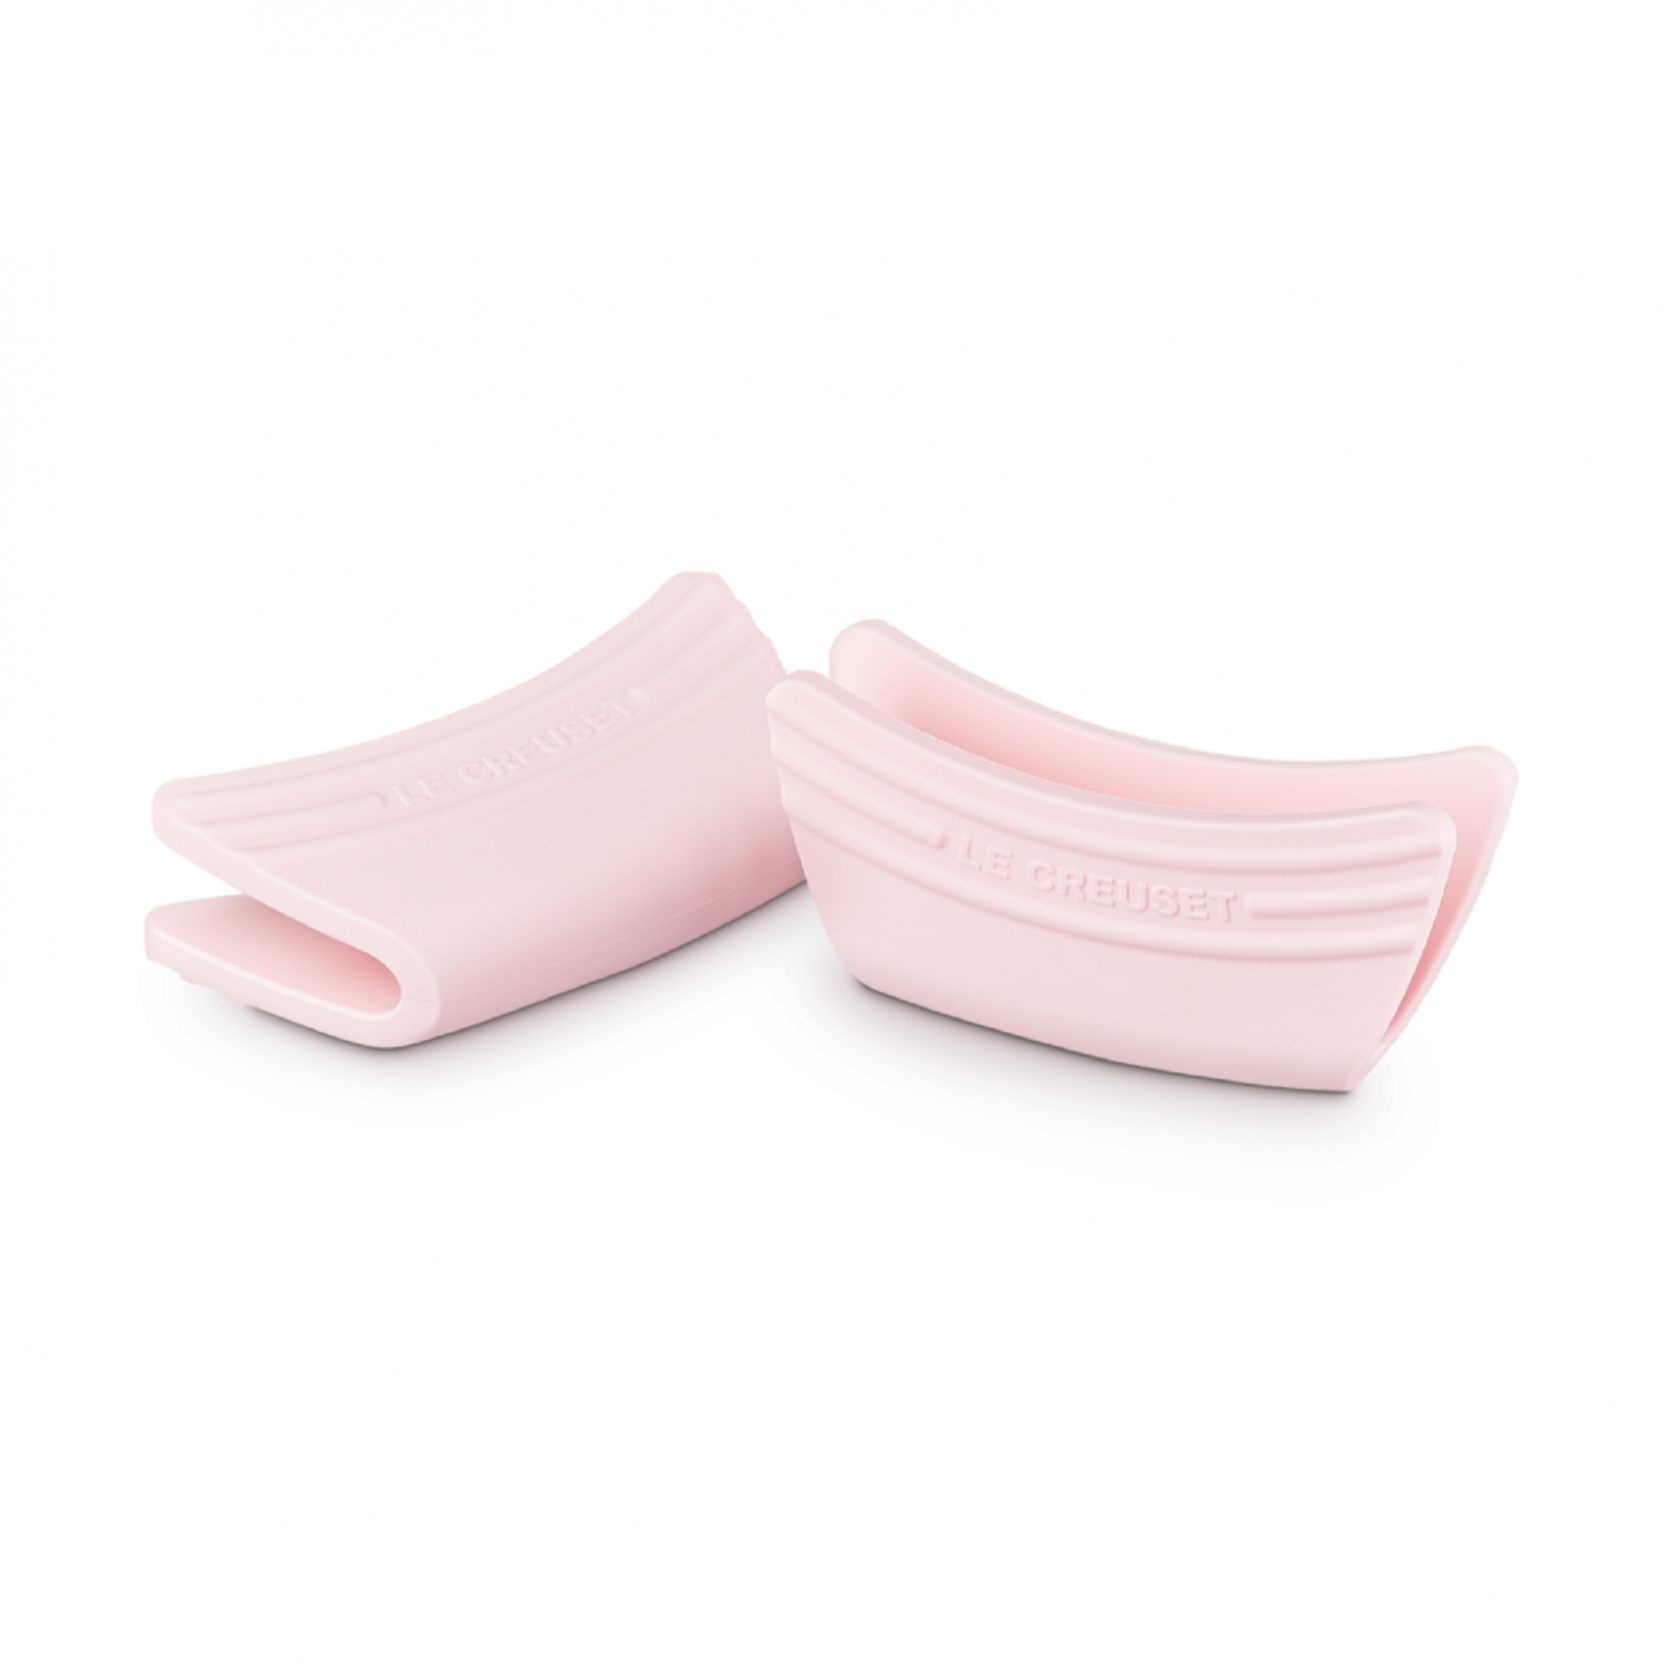 https://www.tattahome.com/84249-thickbox_default/le-creuset-set-of-2-handle-grips-shell-pink.jpg